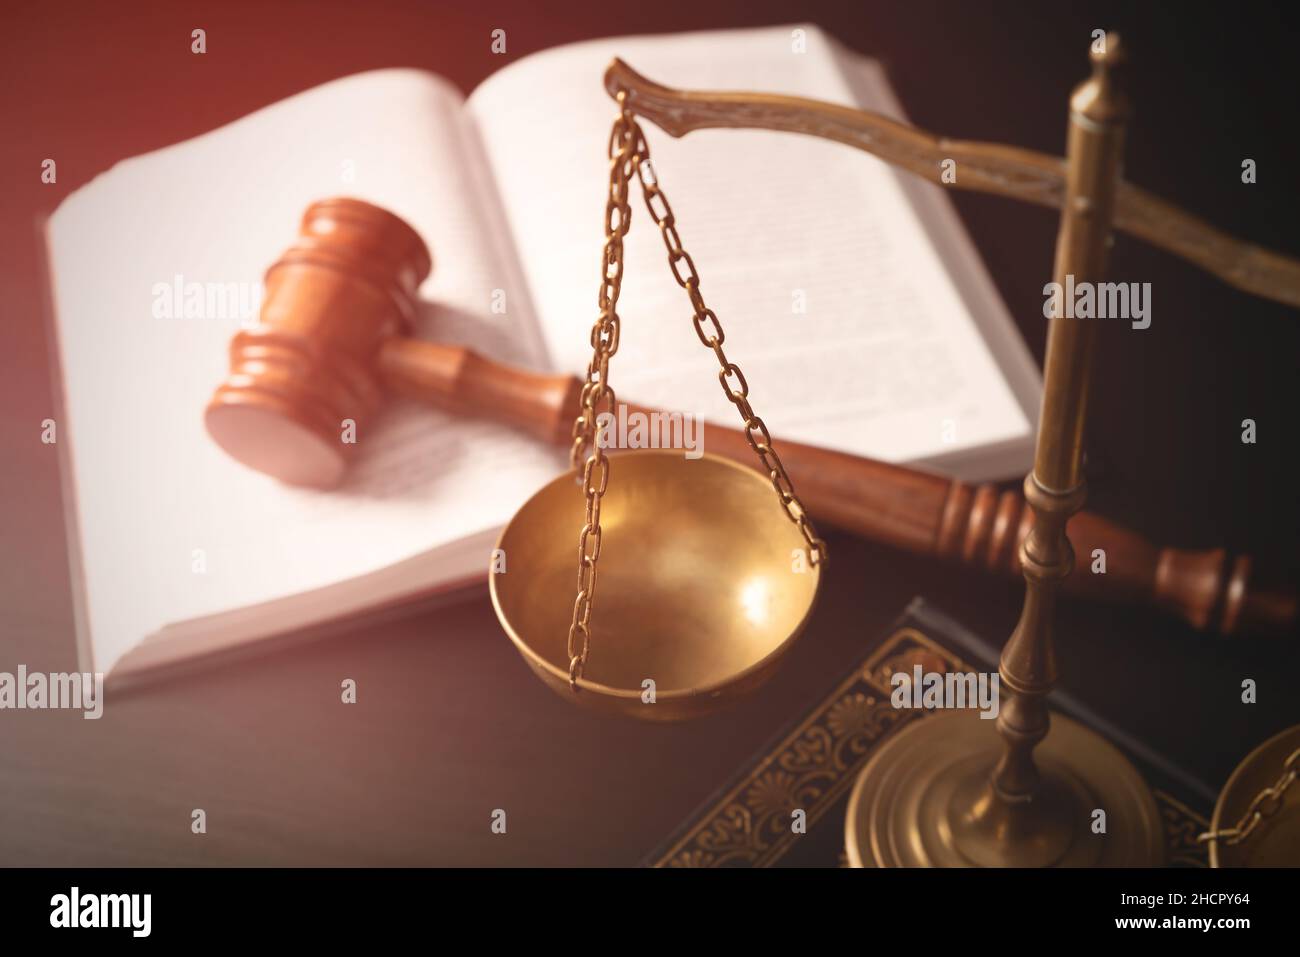 Weight scale and gavel. Legal, law and justice concept Stock Photo